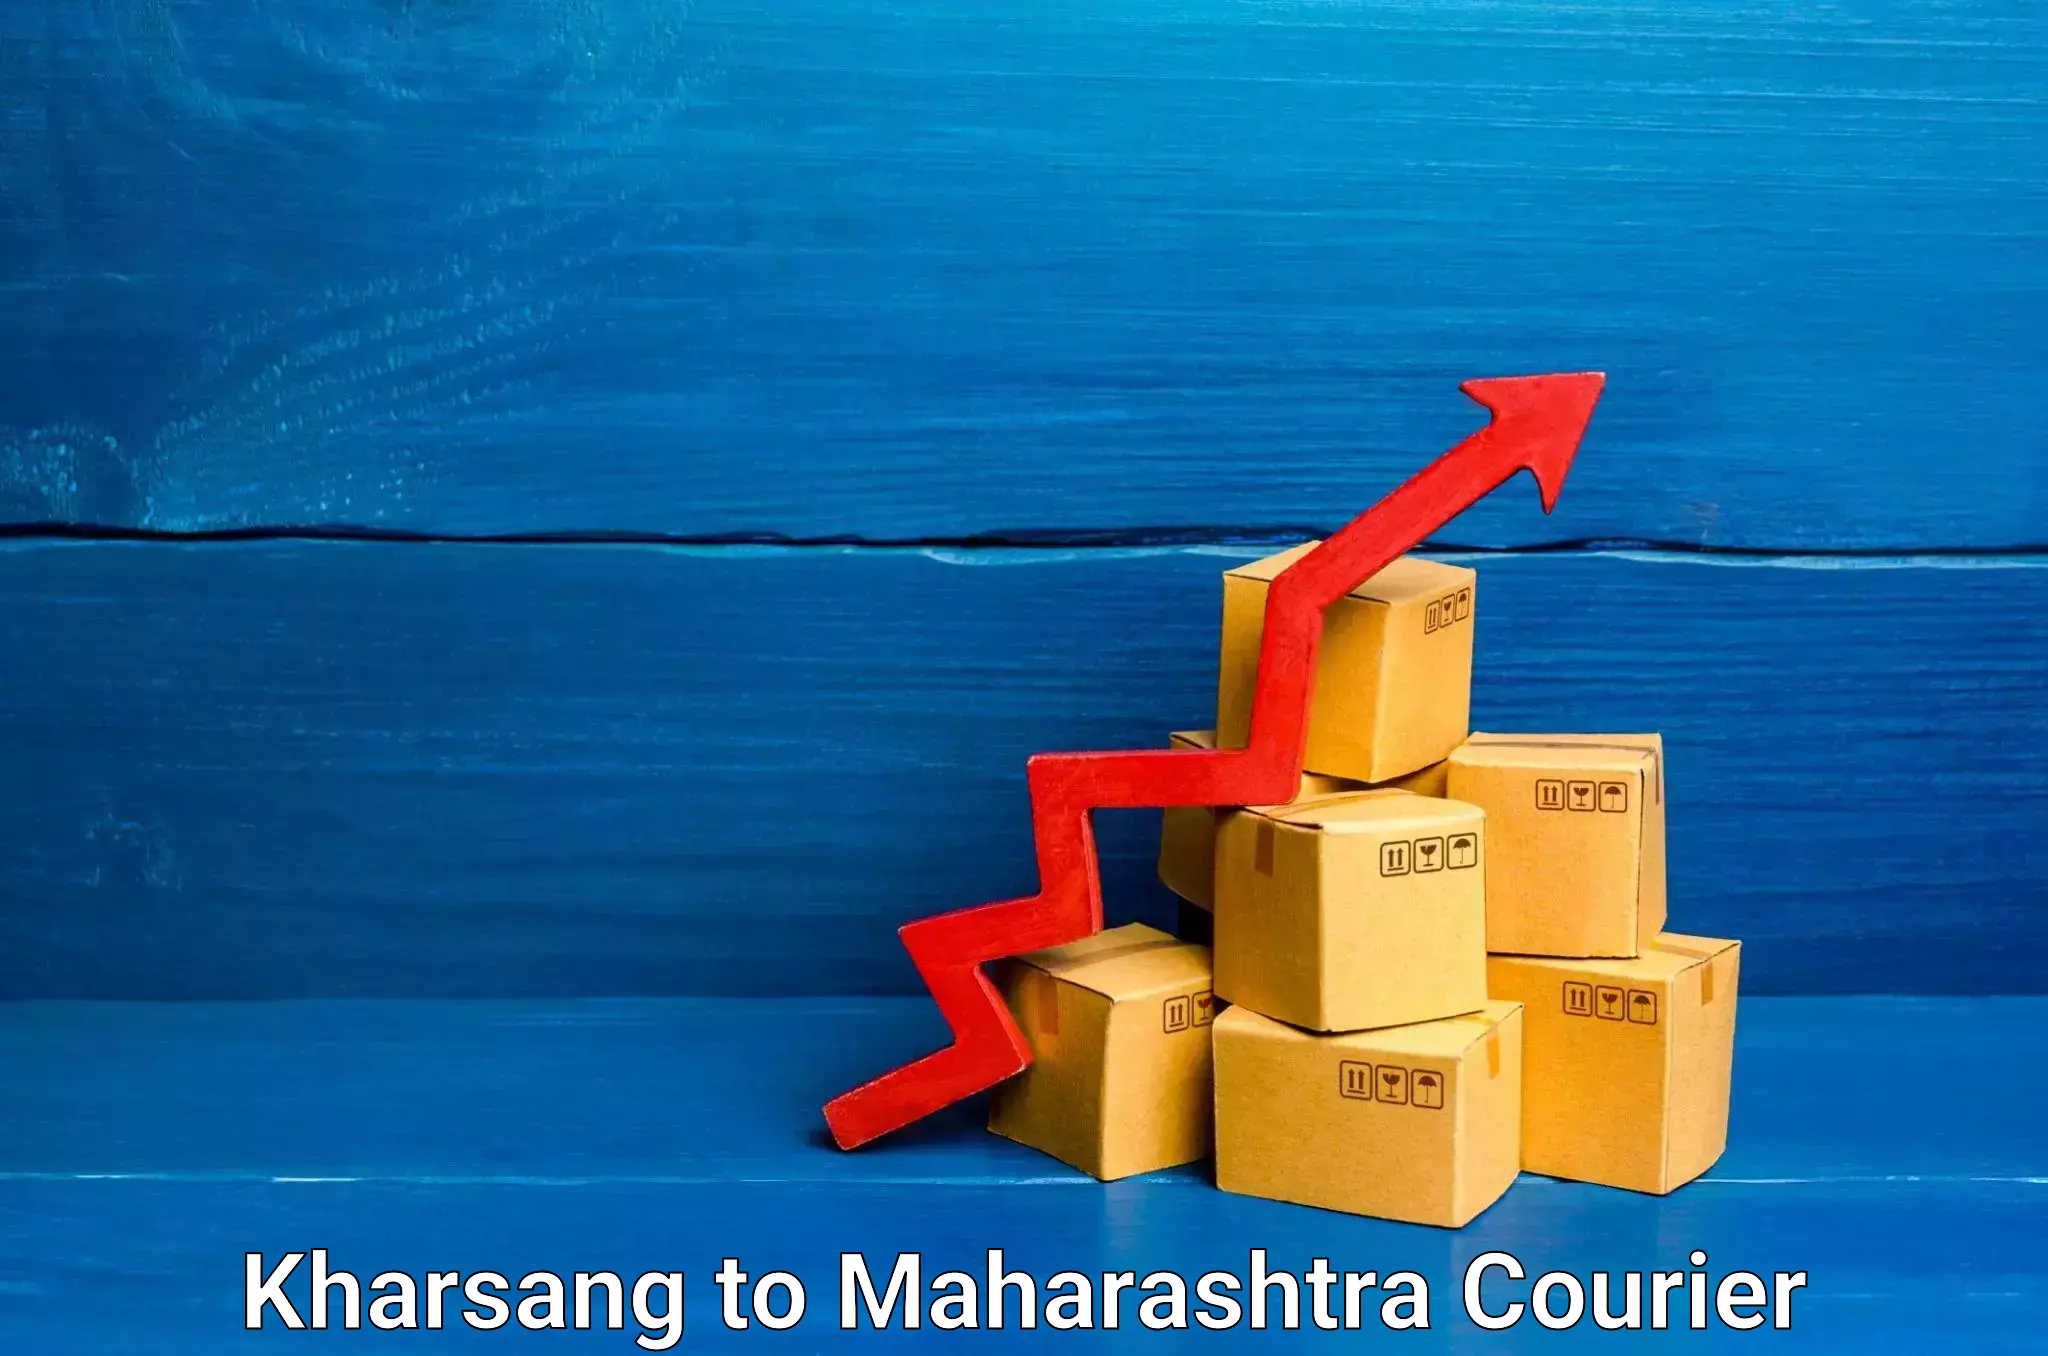 Same-day delivery options in Kharsang to Maharashtra